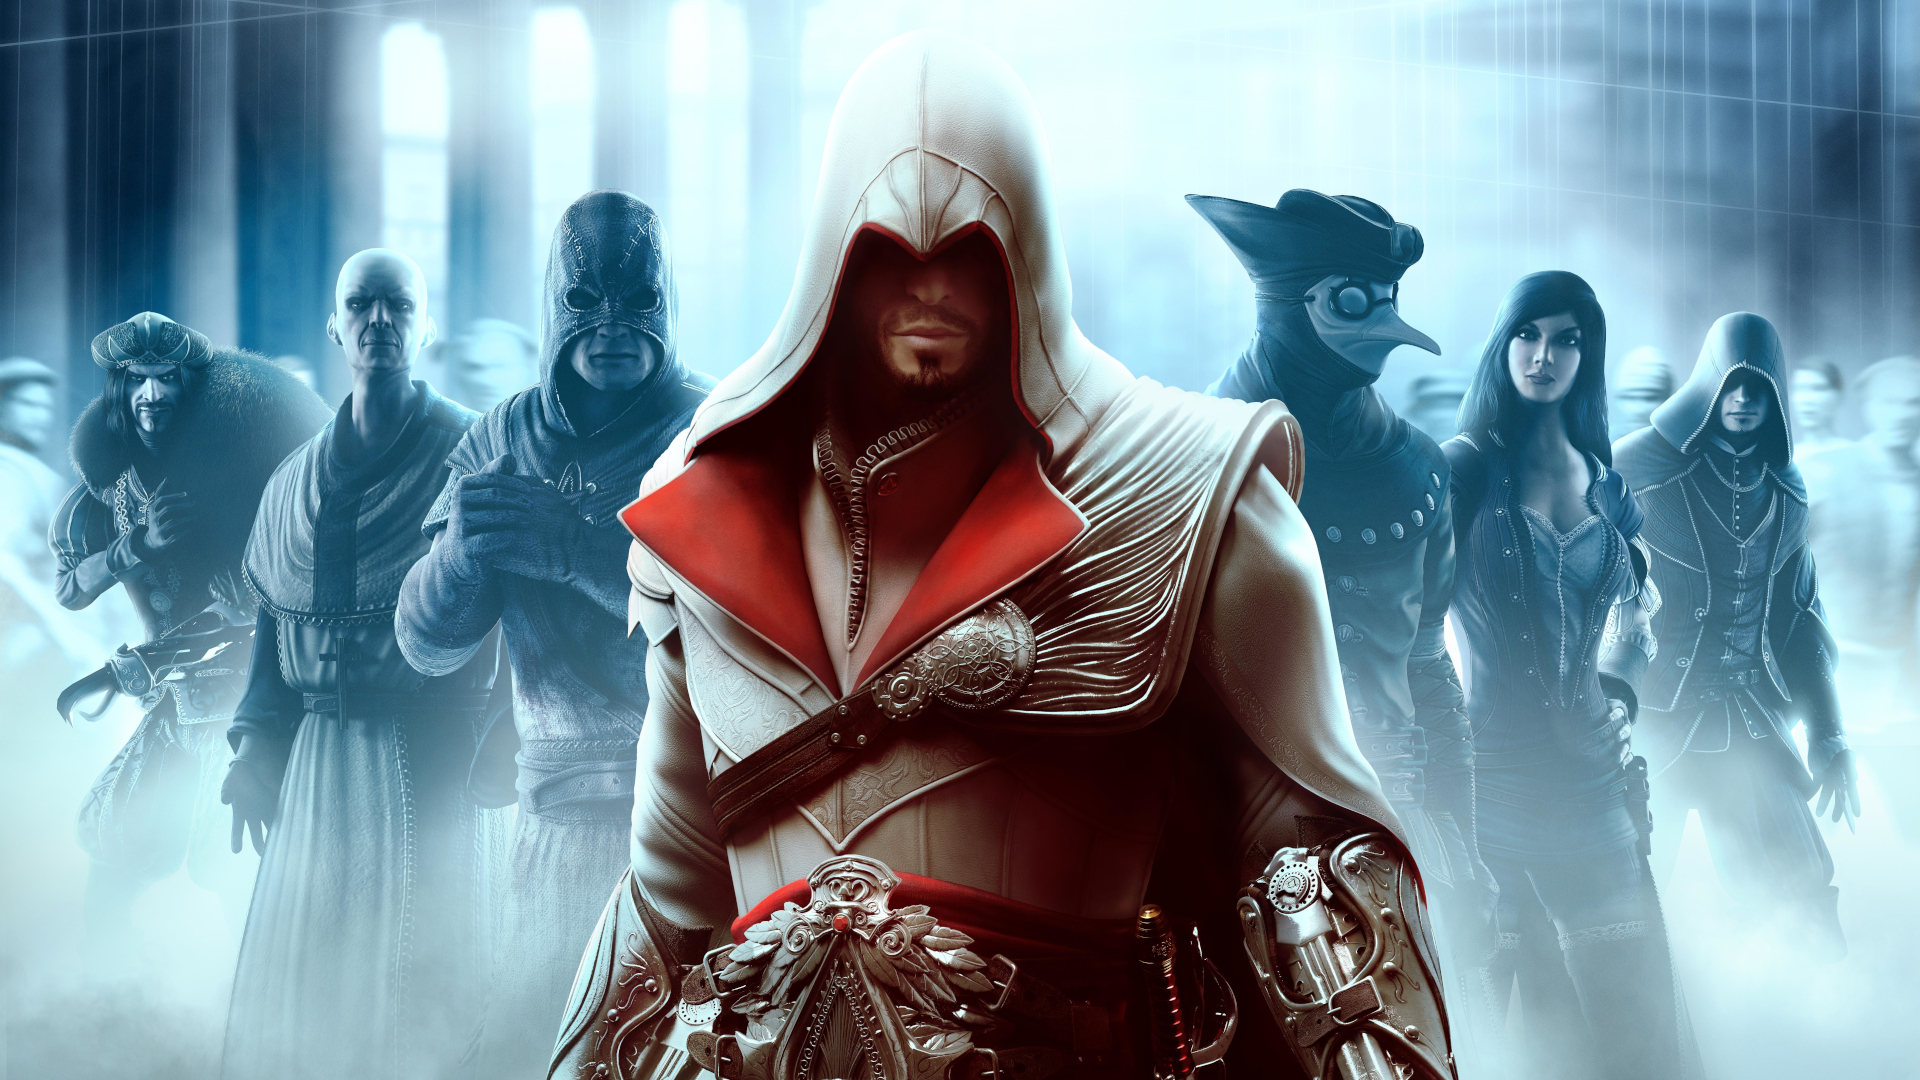 Ezio in Assassin's Creed Brotherhood standing in front of a line of other assassins